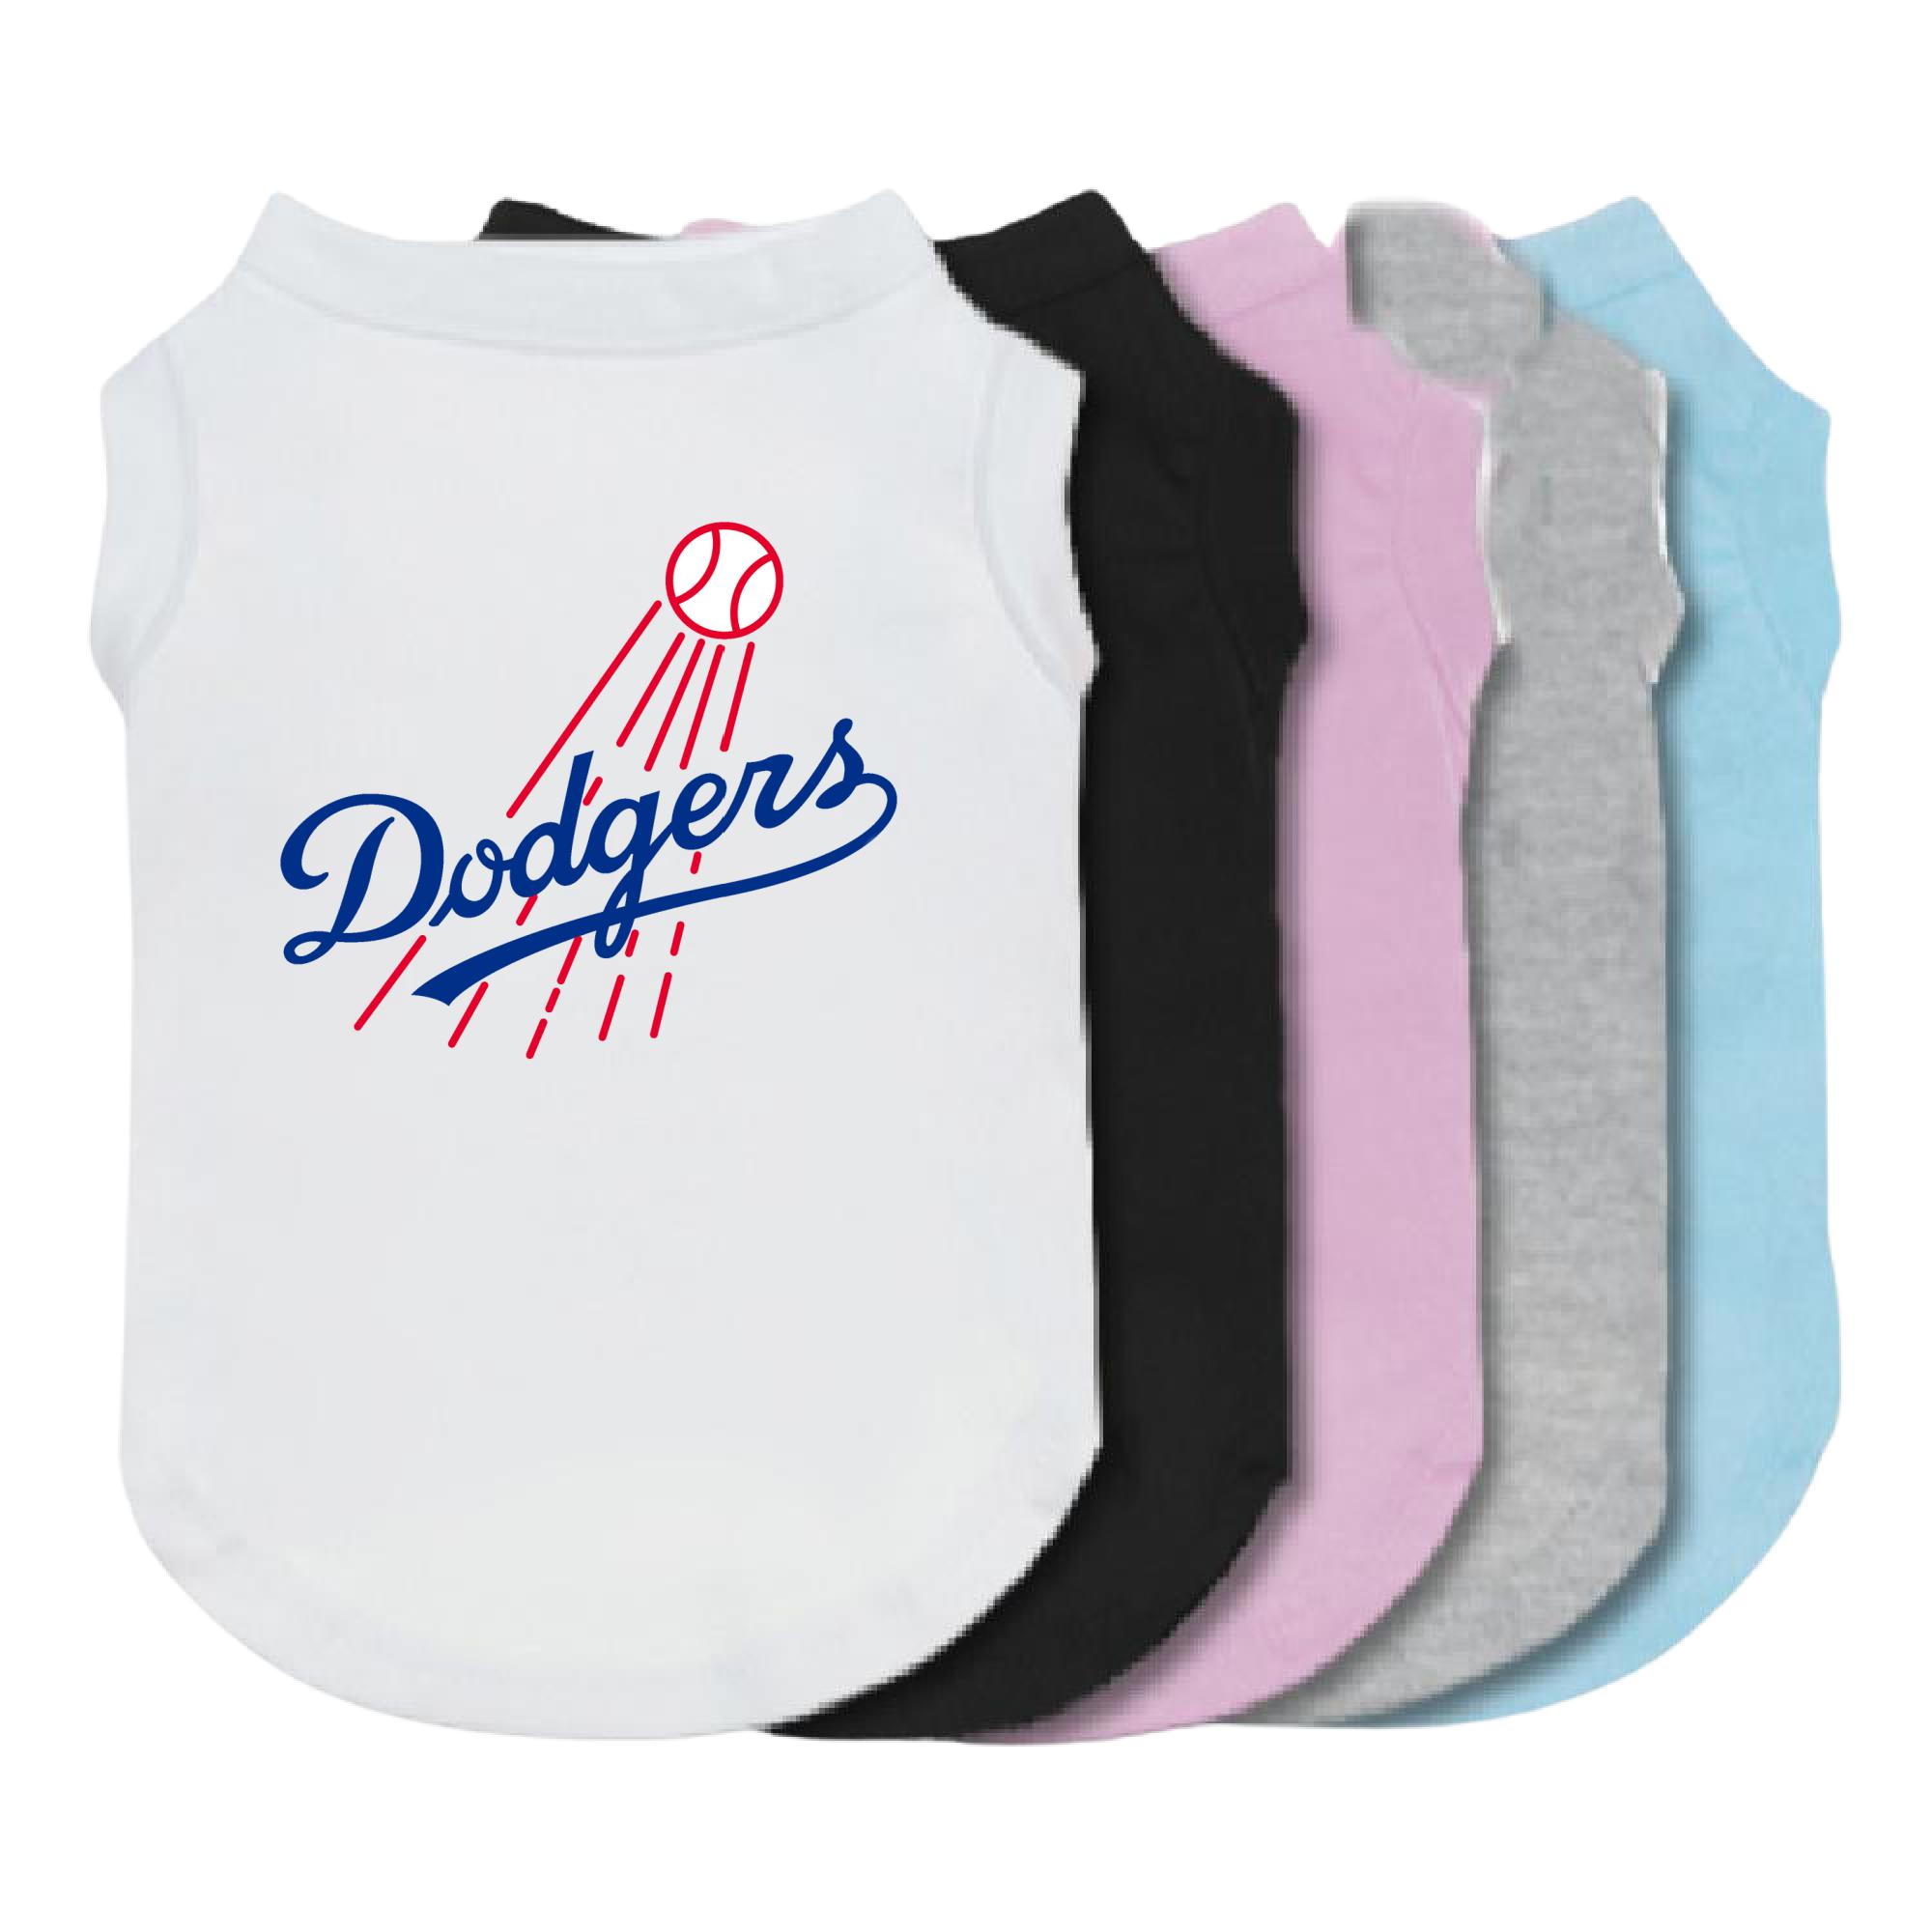 Los Angeles Dodgers Dog Shirt exclusive at The Honest Dog